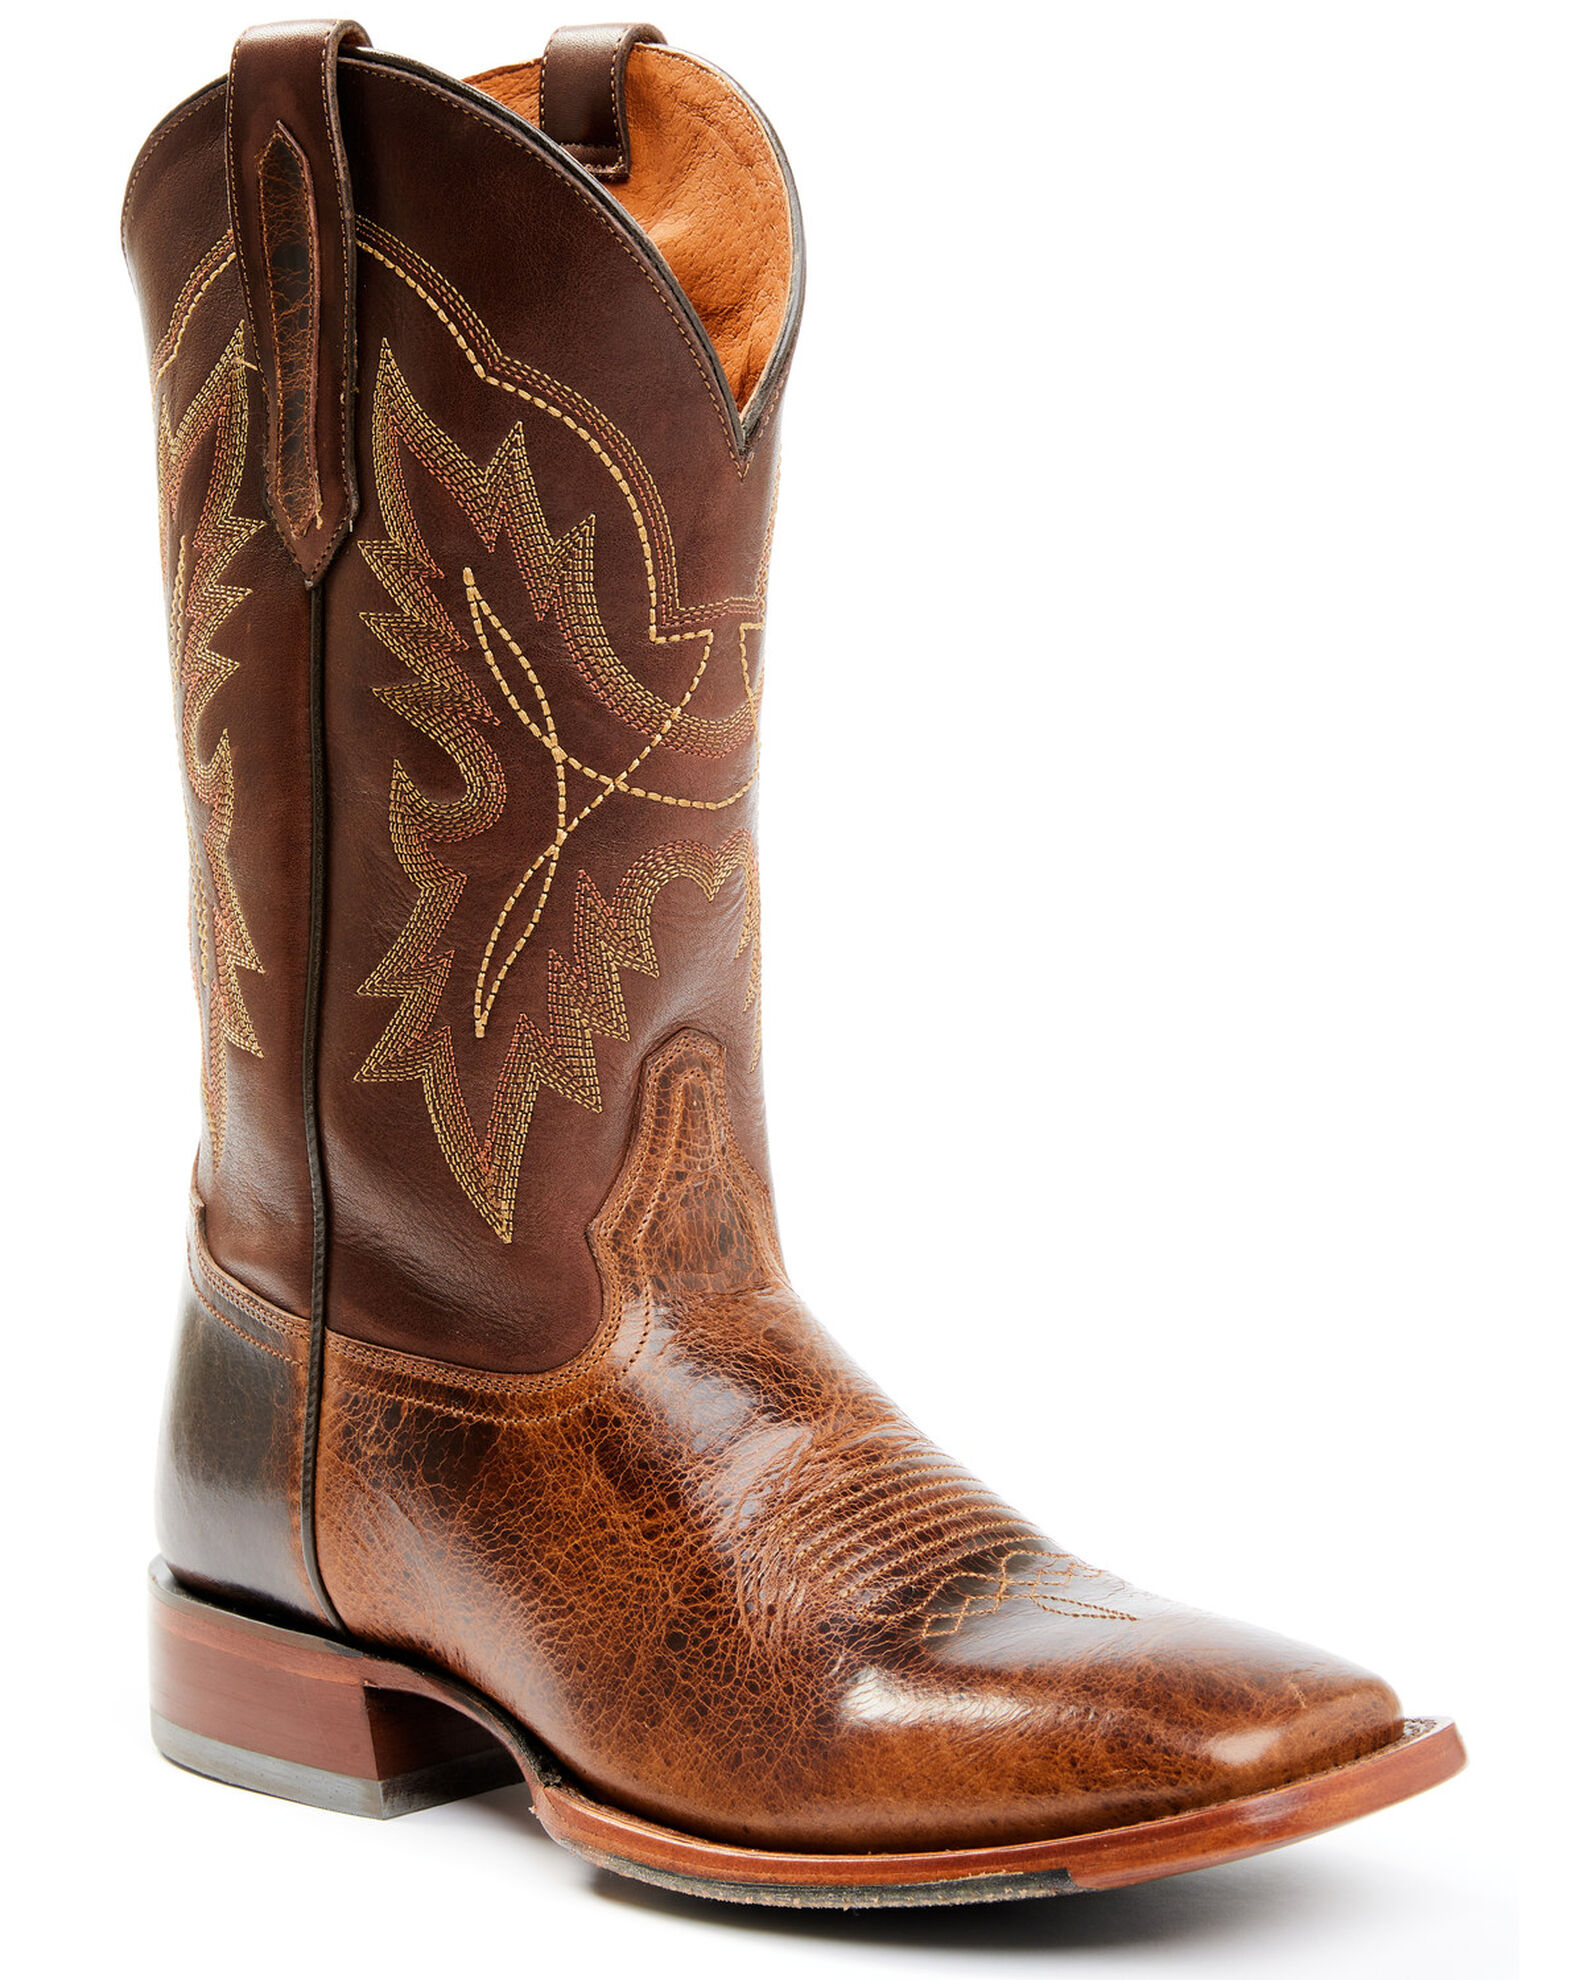 Relic Western Boots Narrow Square Toe – Idyllwind Fueled, 44% OFF